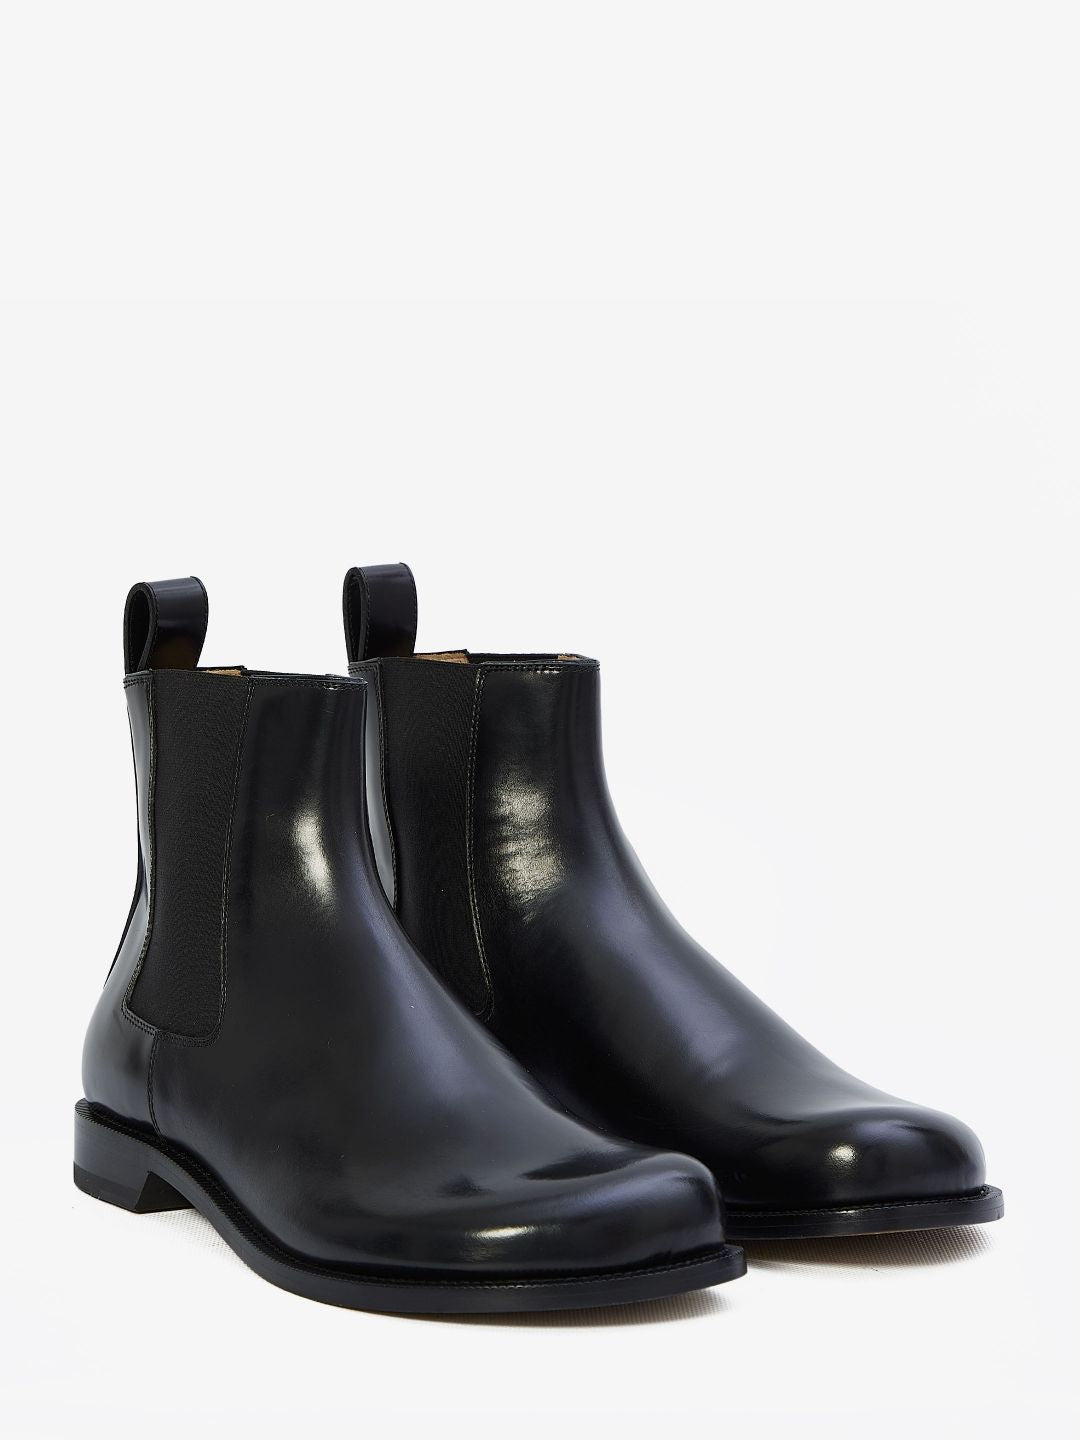 LOEWE Men's Black Campo Chelsea Boots for FW23